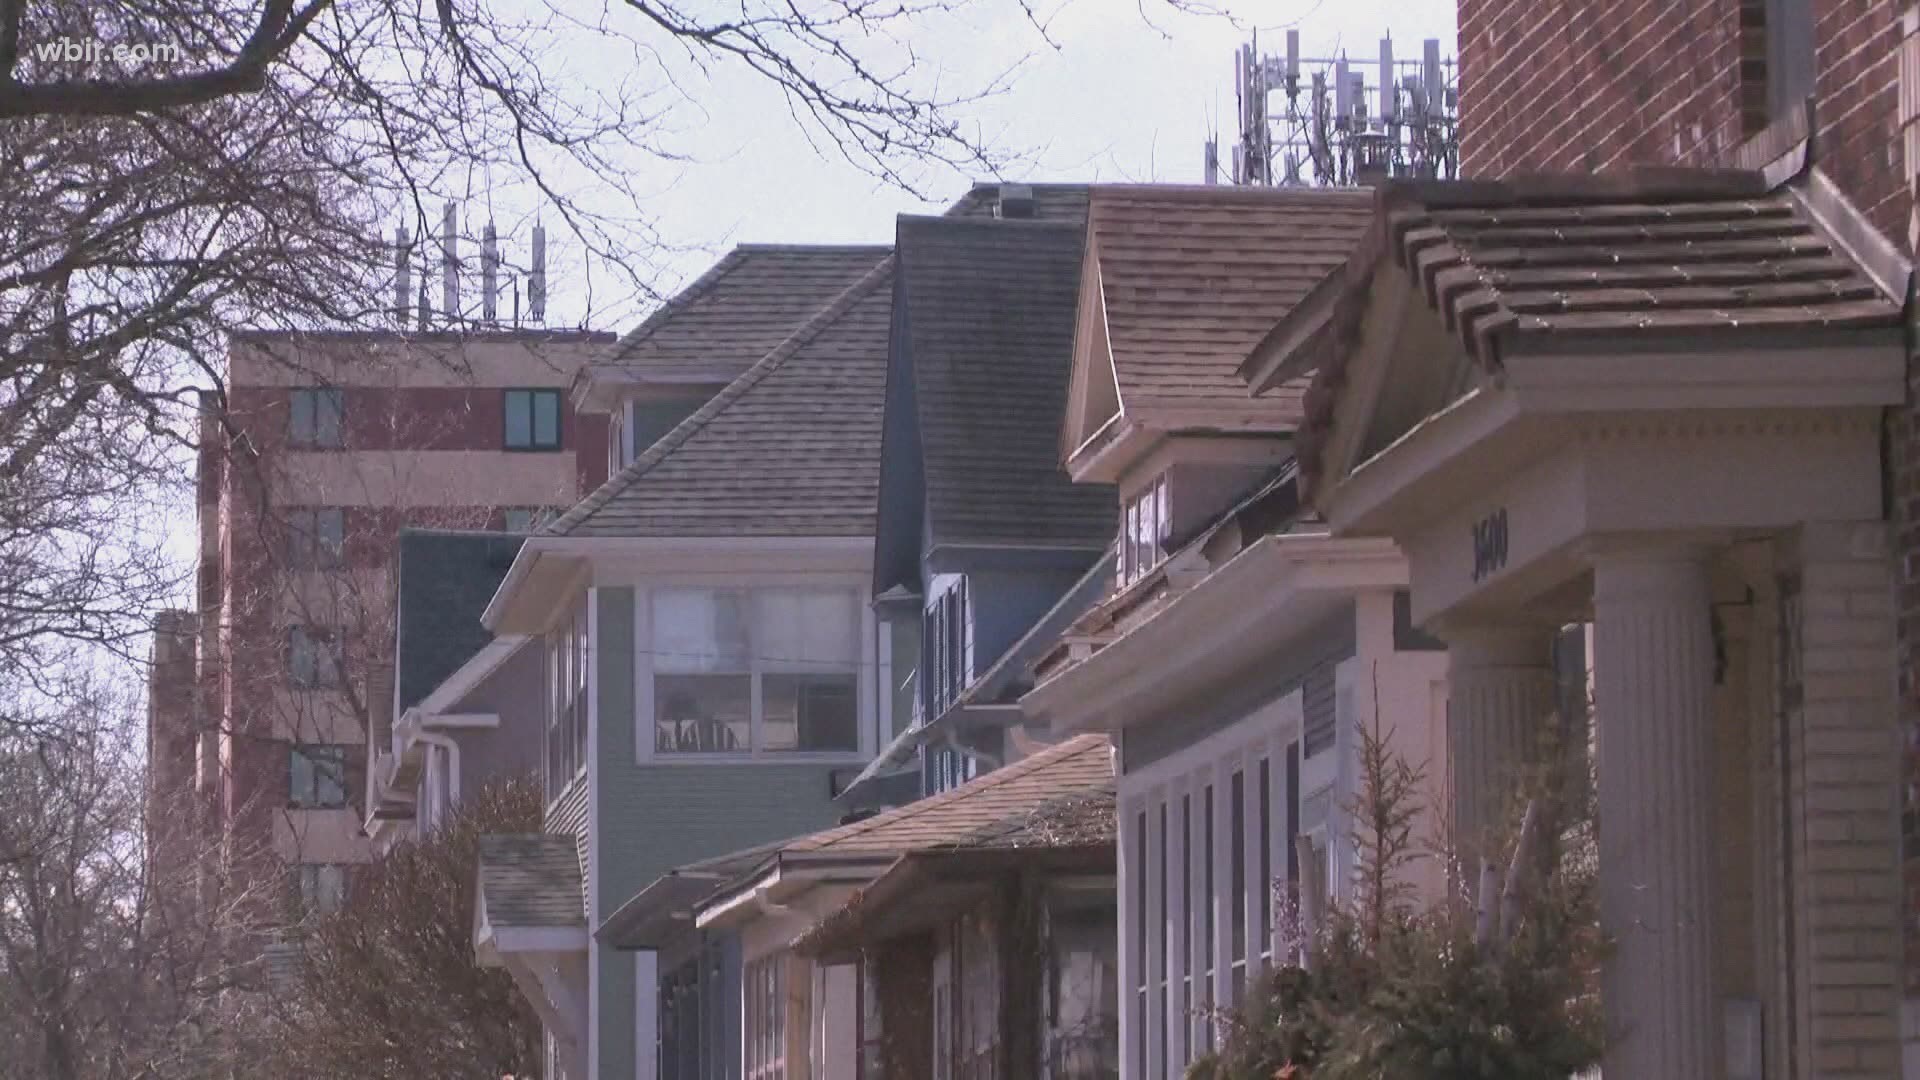 People struggling to pay their bills will now have some extra help-- thanks to the new 'Knox Housing Assistance' program.